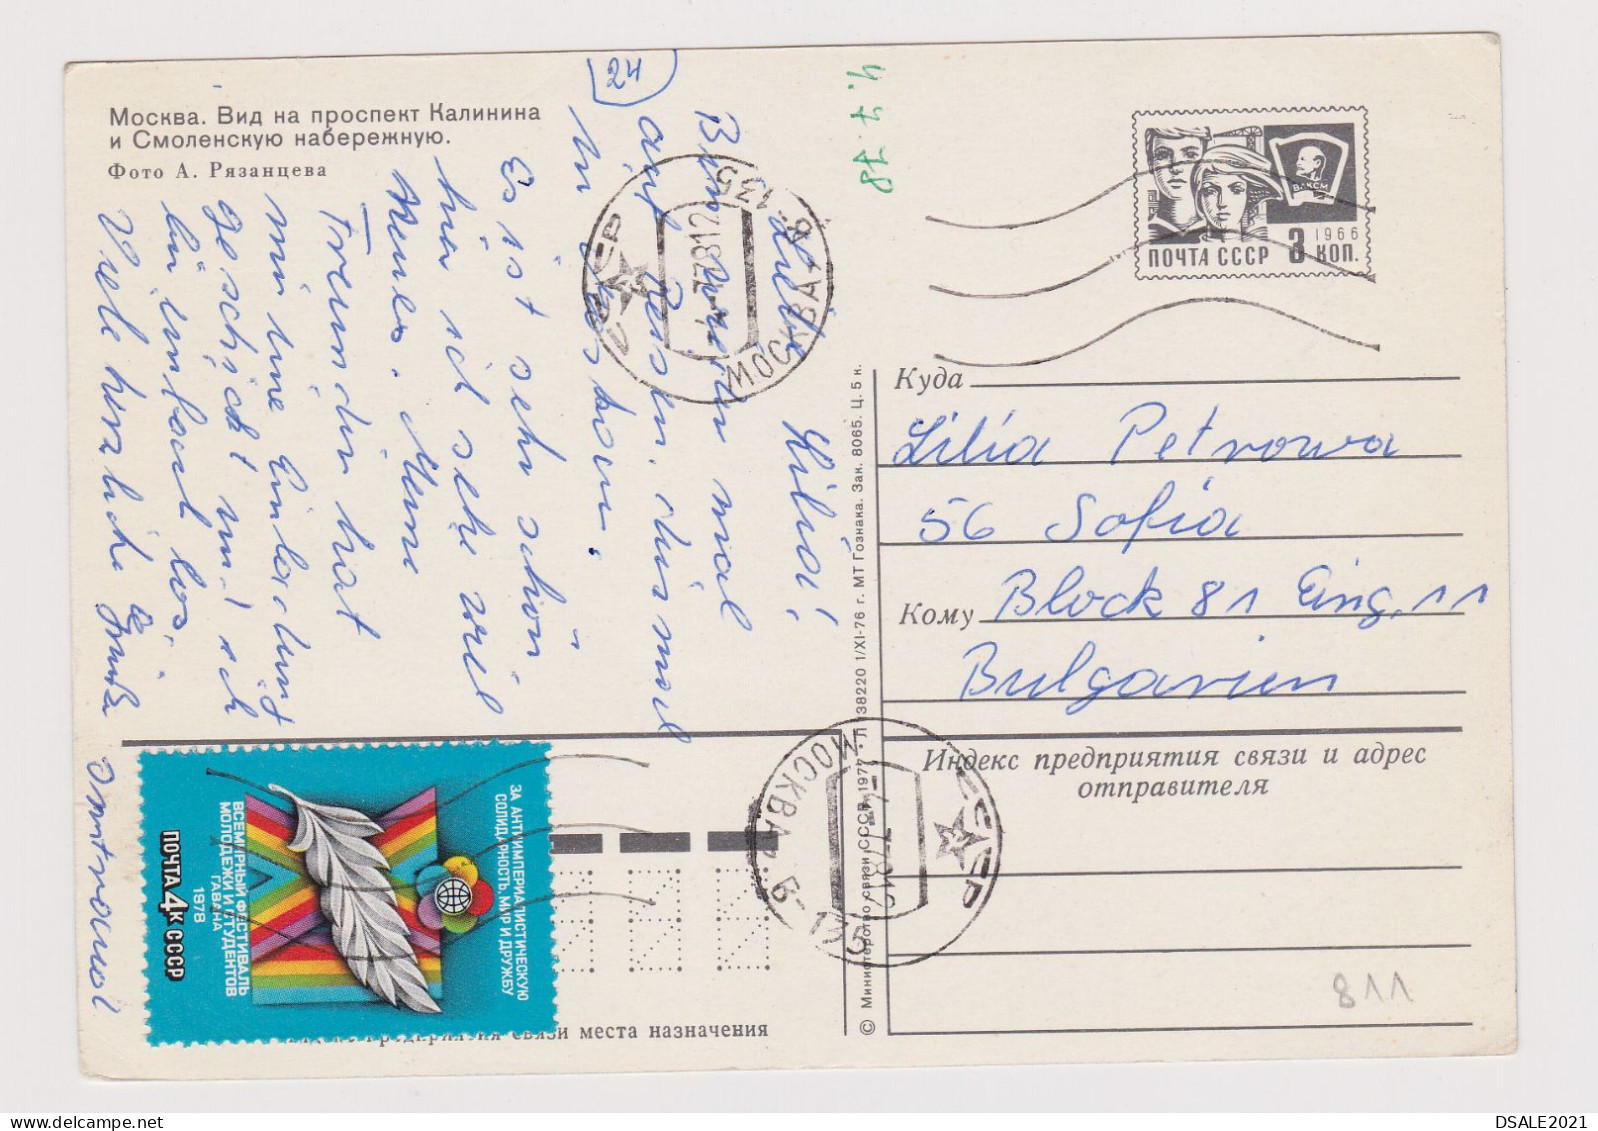 Russia USSR Soviet Union, 1970s Postal Stationery Card, Entier, MOSCOW View, W/Topic Stamp Sent Airmail To Bulgaria /811 - 1970-79